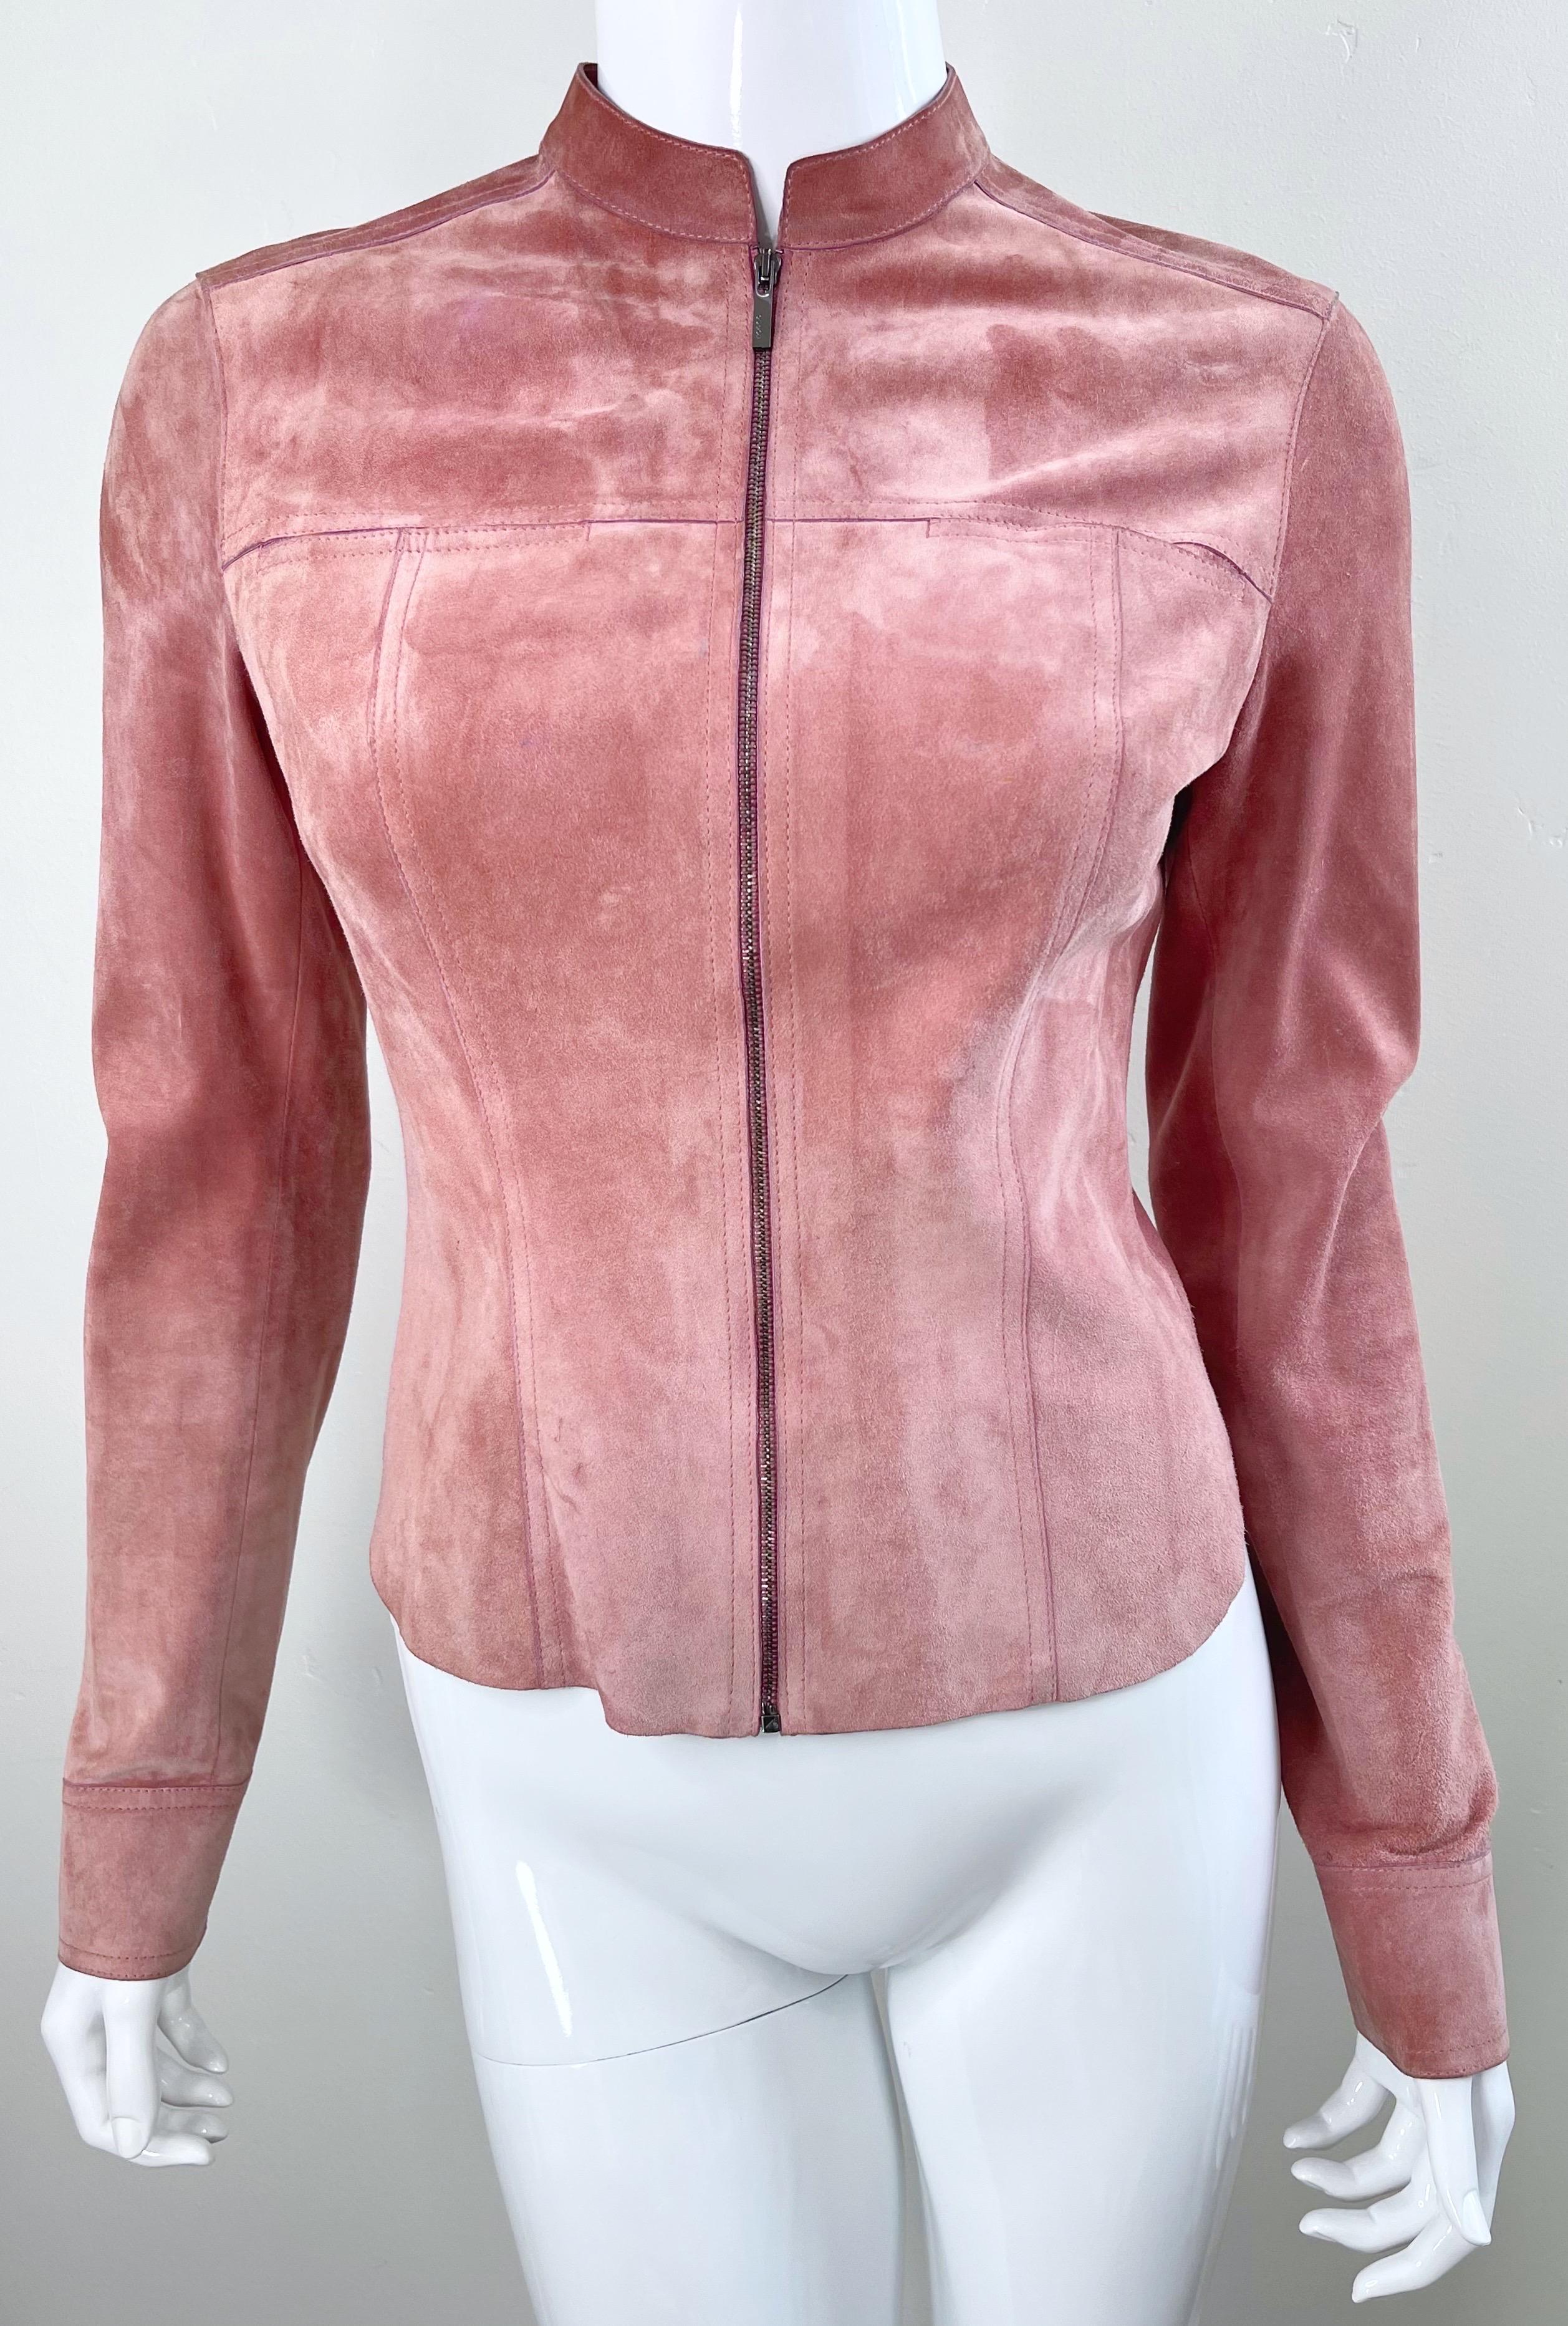 Gucci by Tom Ford Pink Mauve Dusty Rose Suede Leather Vintage Jacket  5